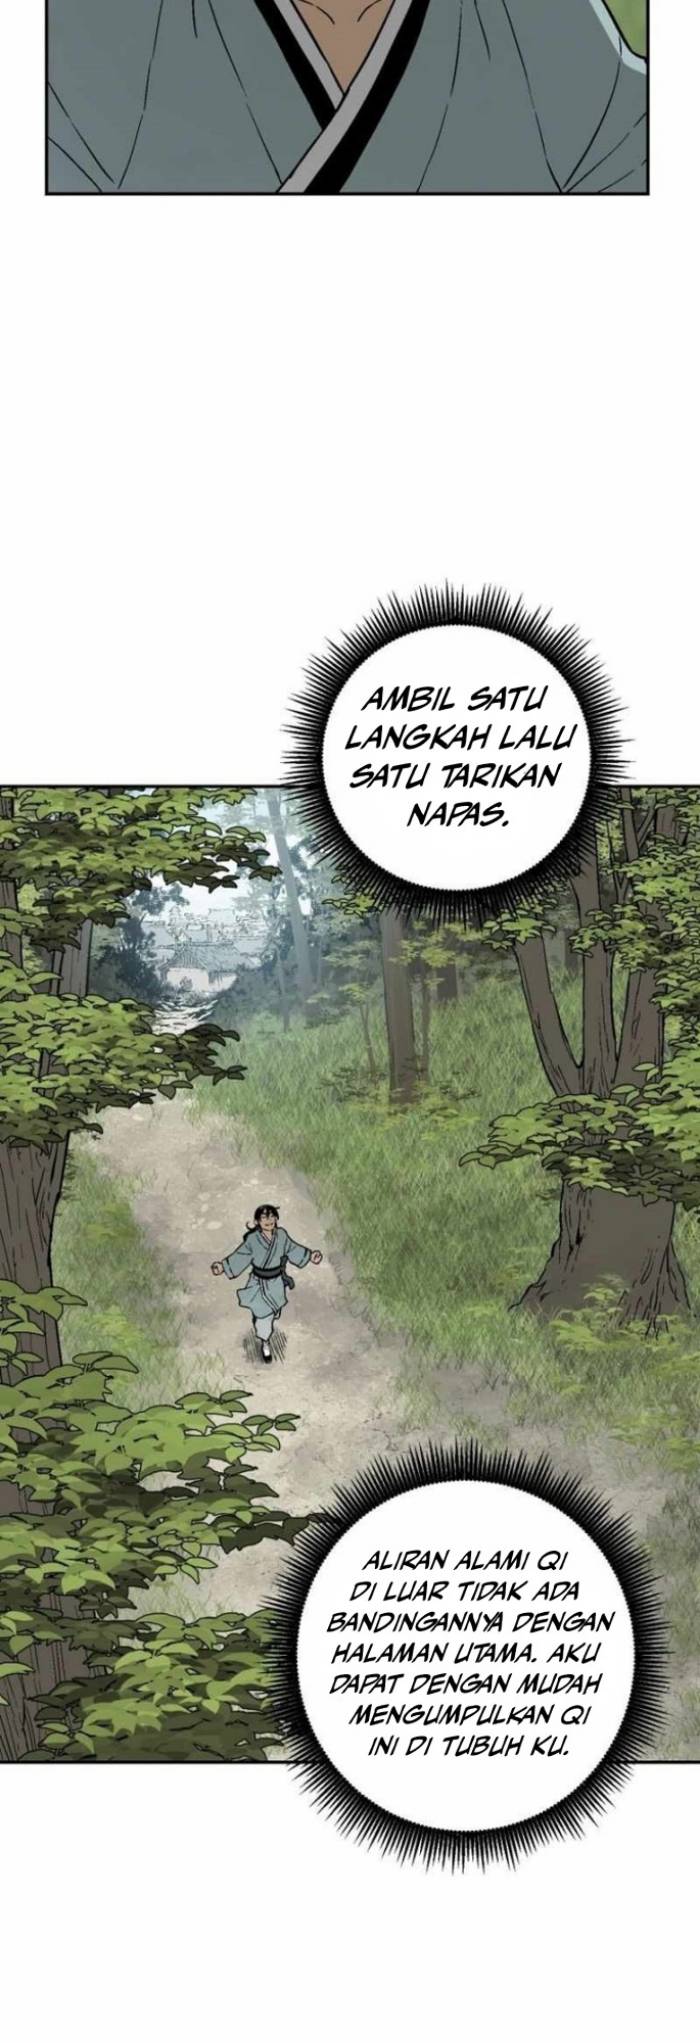 Tales of A Shinning Sword Chapter 05